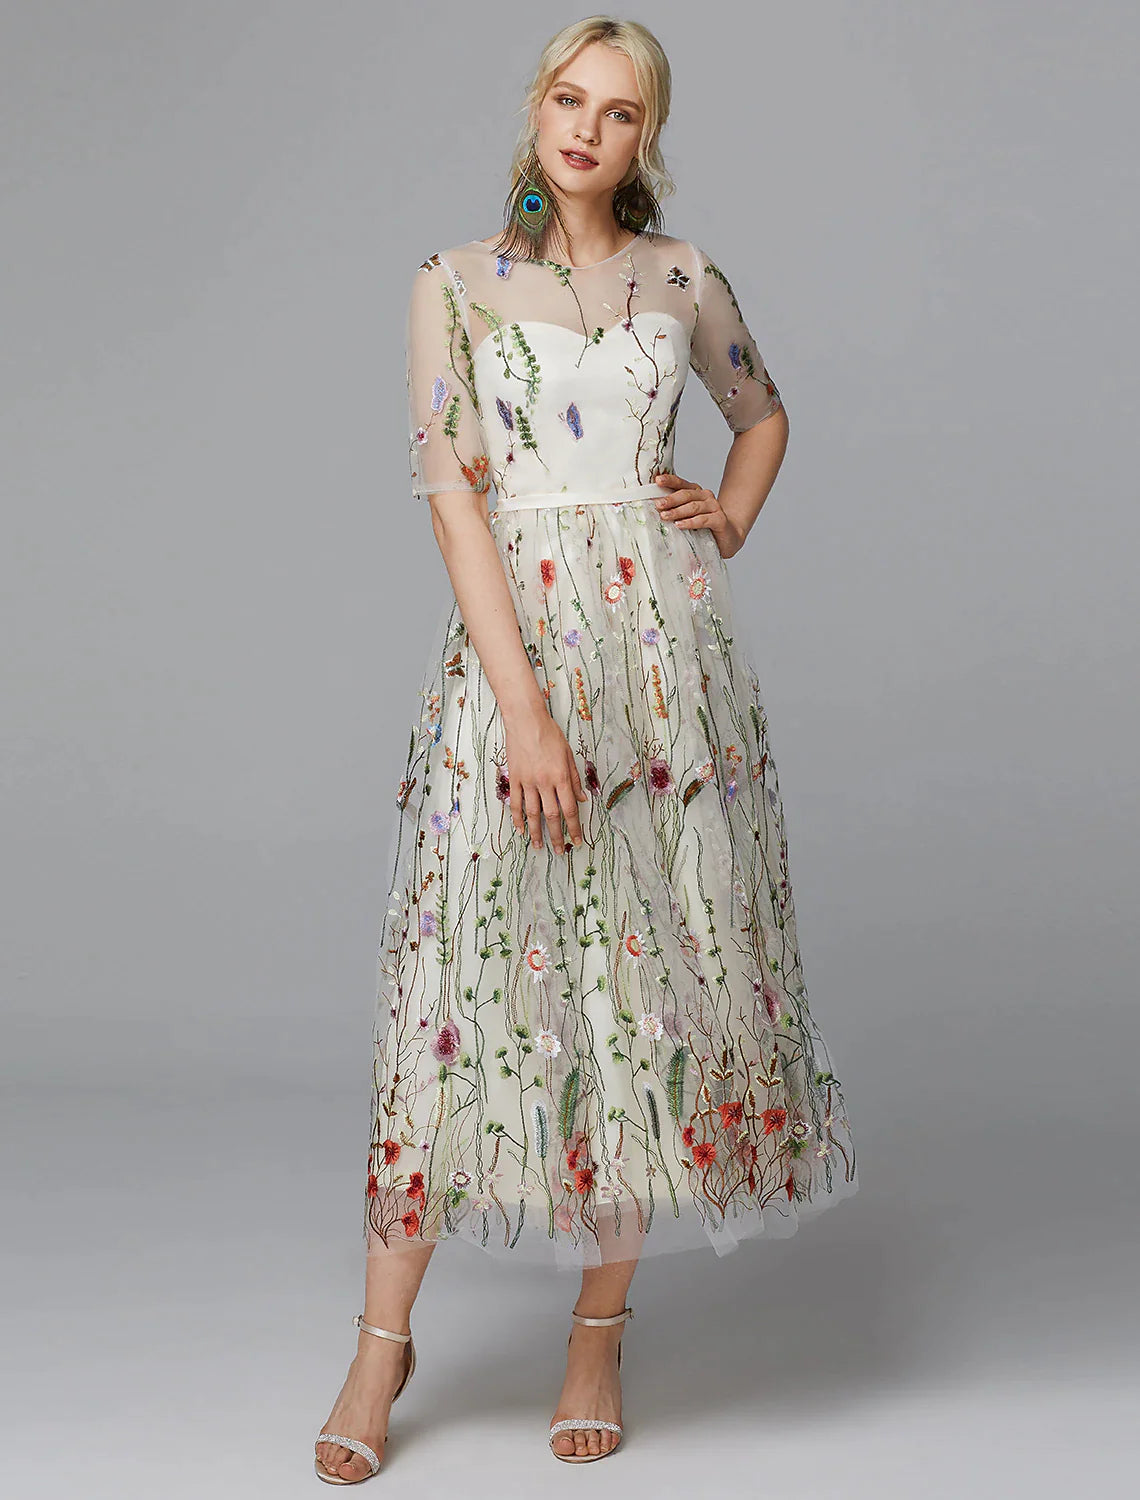 A-Line Floral Dress Holiday Wedding Guest Tea Length Half Sleeve Illusion Neck Lace with Embroidery Appliques